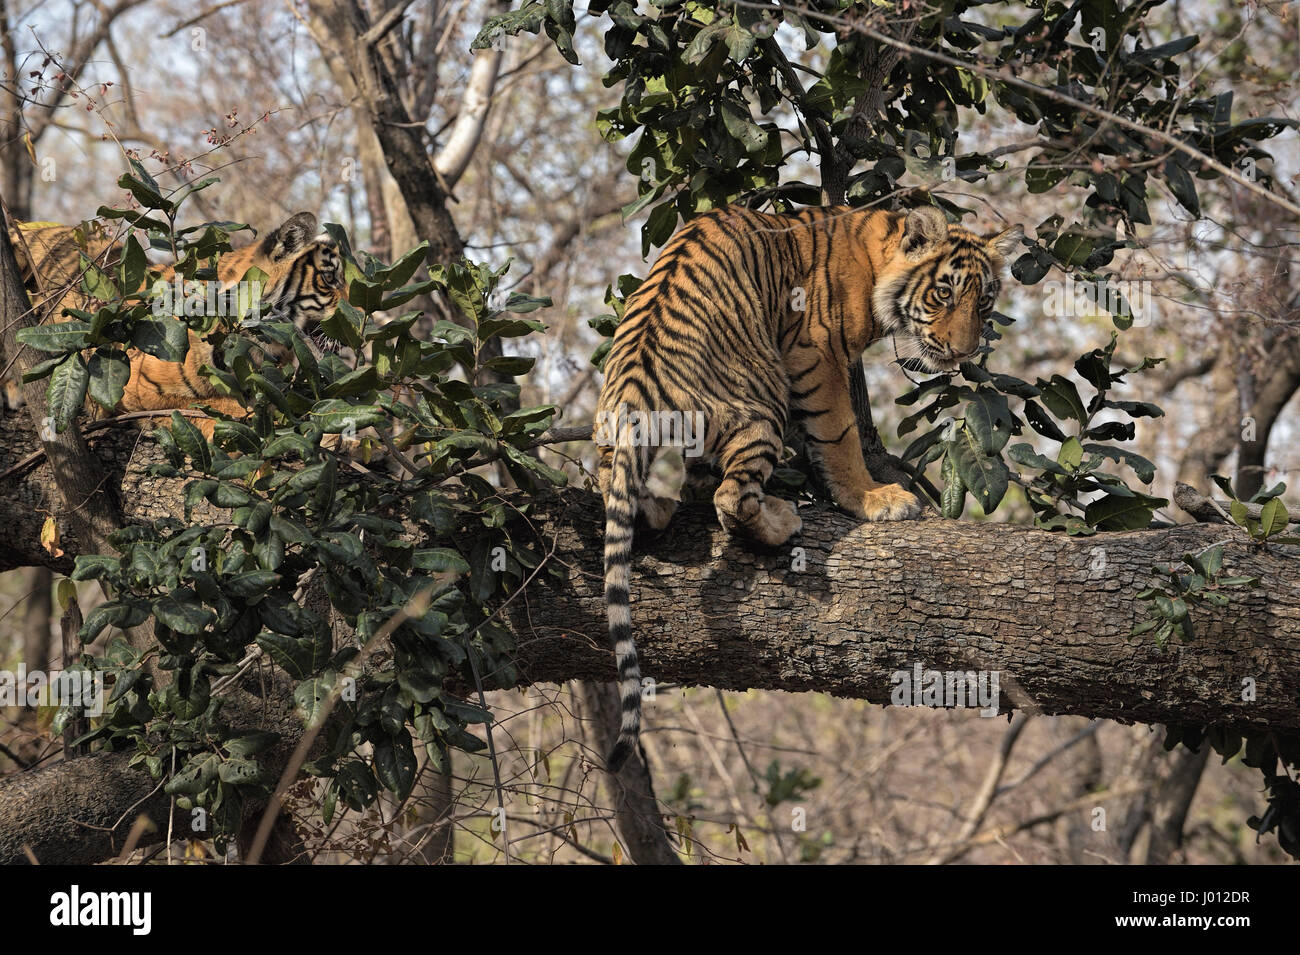 Two wild tiger cubs sitting on the trunk of a tree in Ranthambhore tiger reserve of India Stock Photo